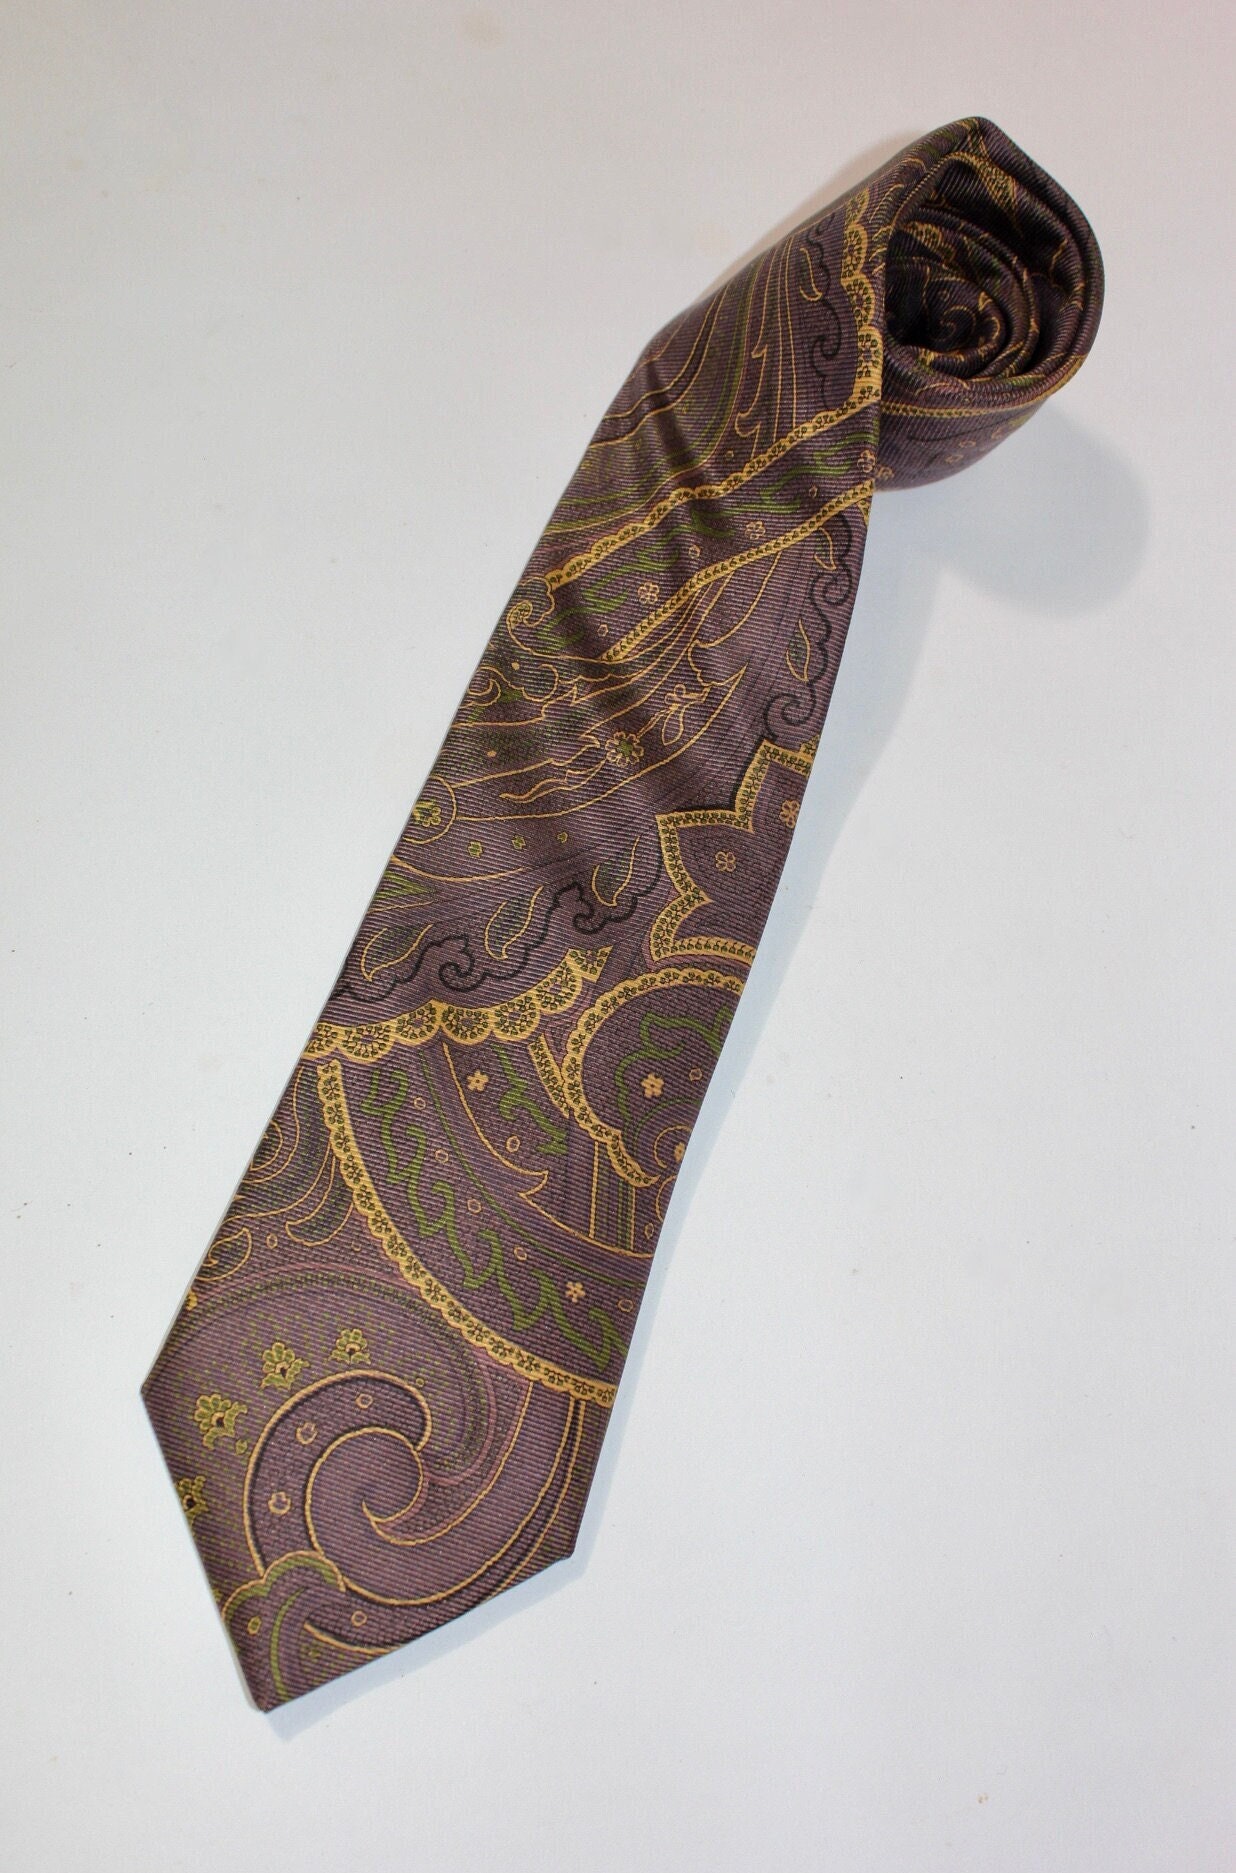 Sale on Modern, Classic Ties and Pocket Squares - Paul Stuart